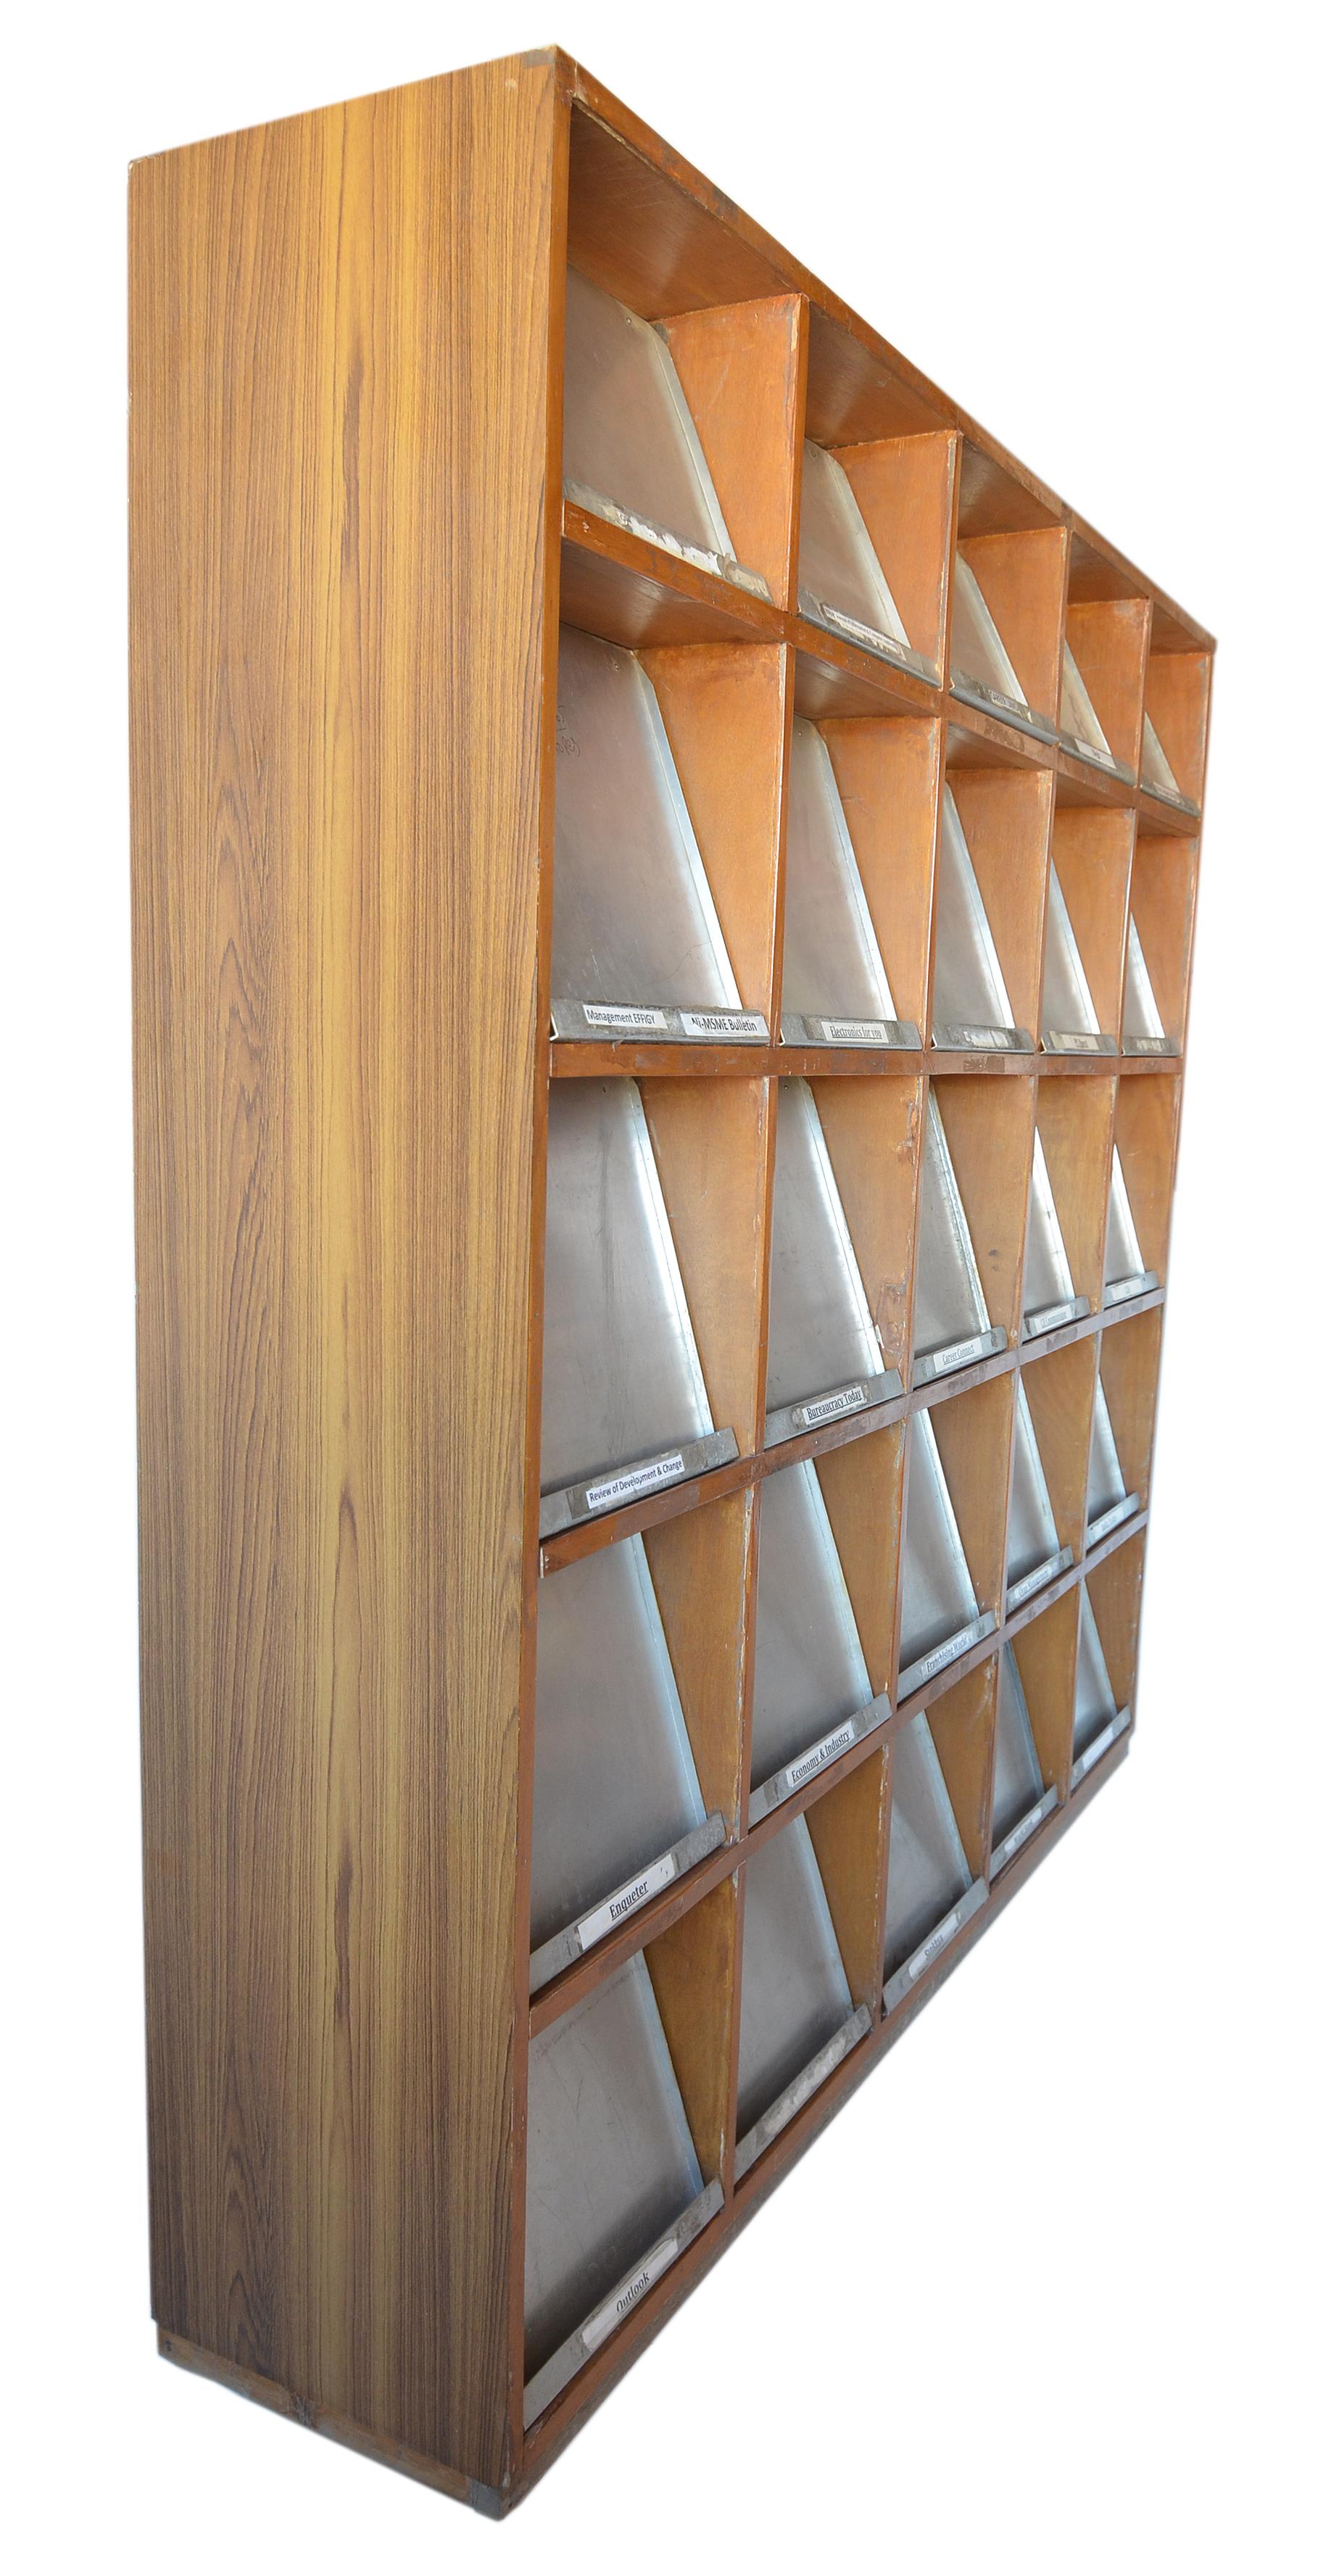 Indian Pierre Jeanneret PJ-R-26-A Periodical Bookcase